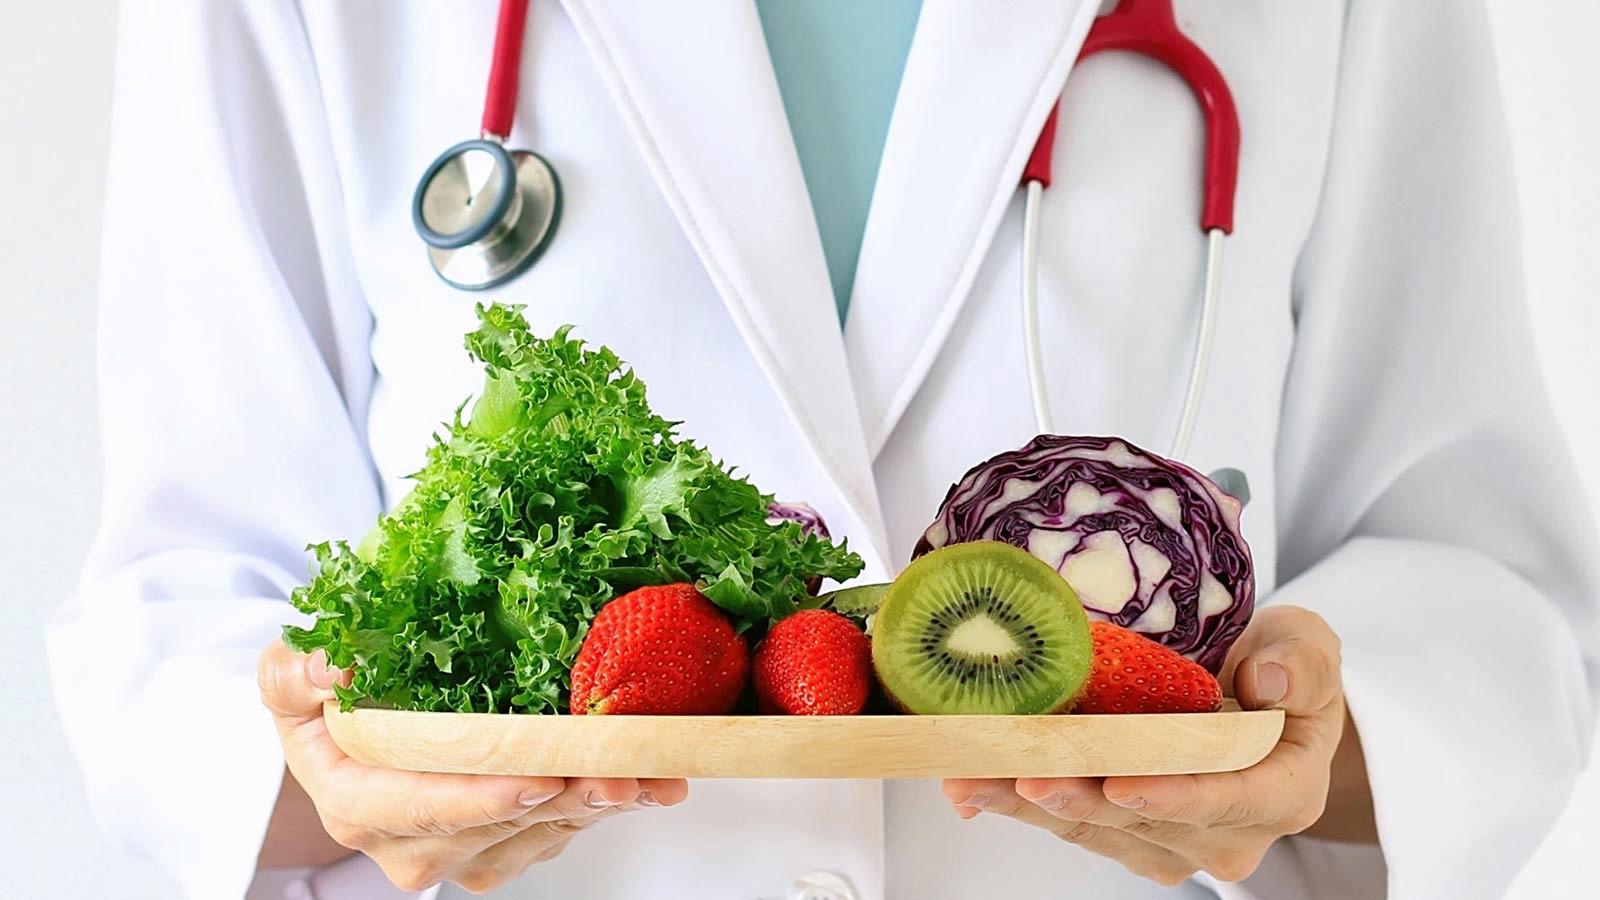 Clinical Nutrition Market Expected to Grow at a CAGR of 4.4% During the Forecast Period 2020-2026